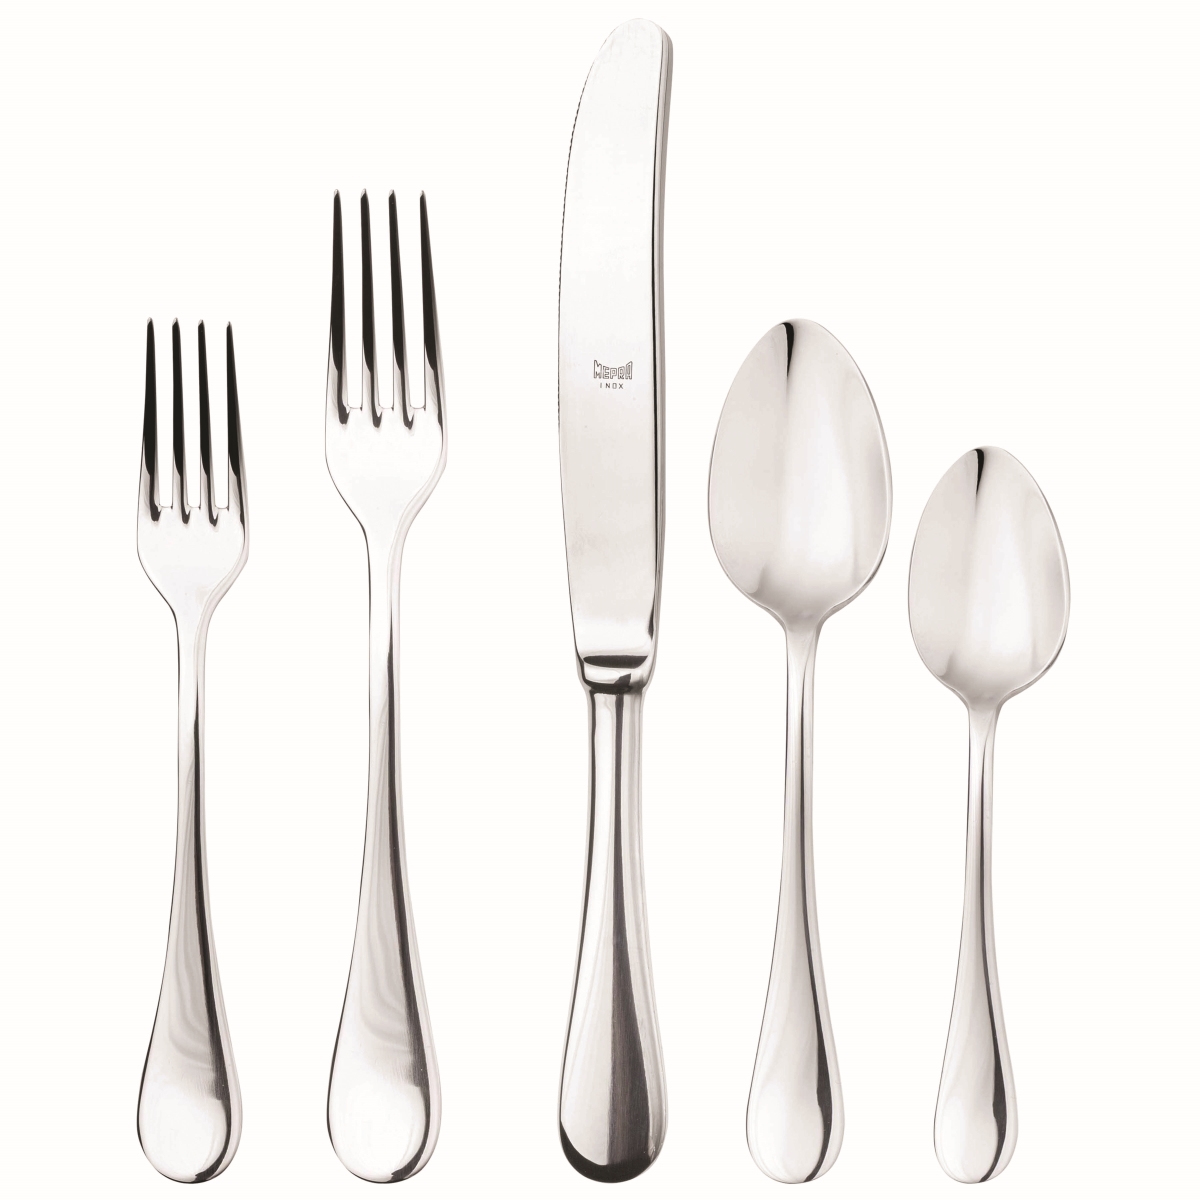 1020b22020 Stainless Steel Brescia Place Setting Cutlery Set - 20 Piece